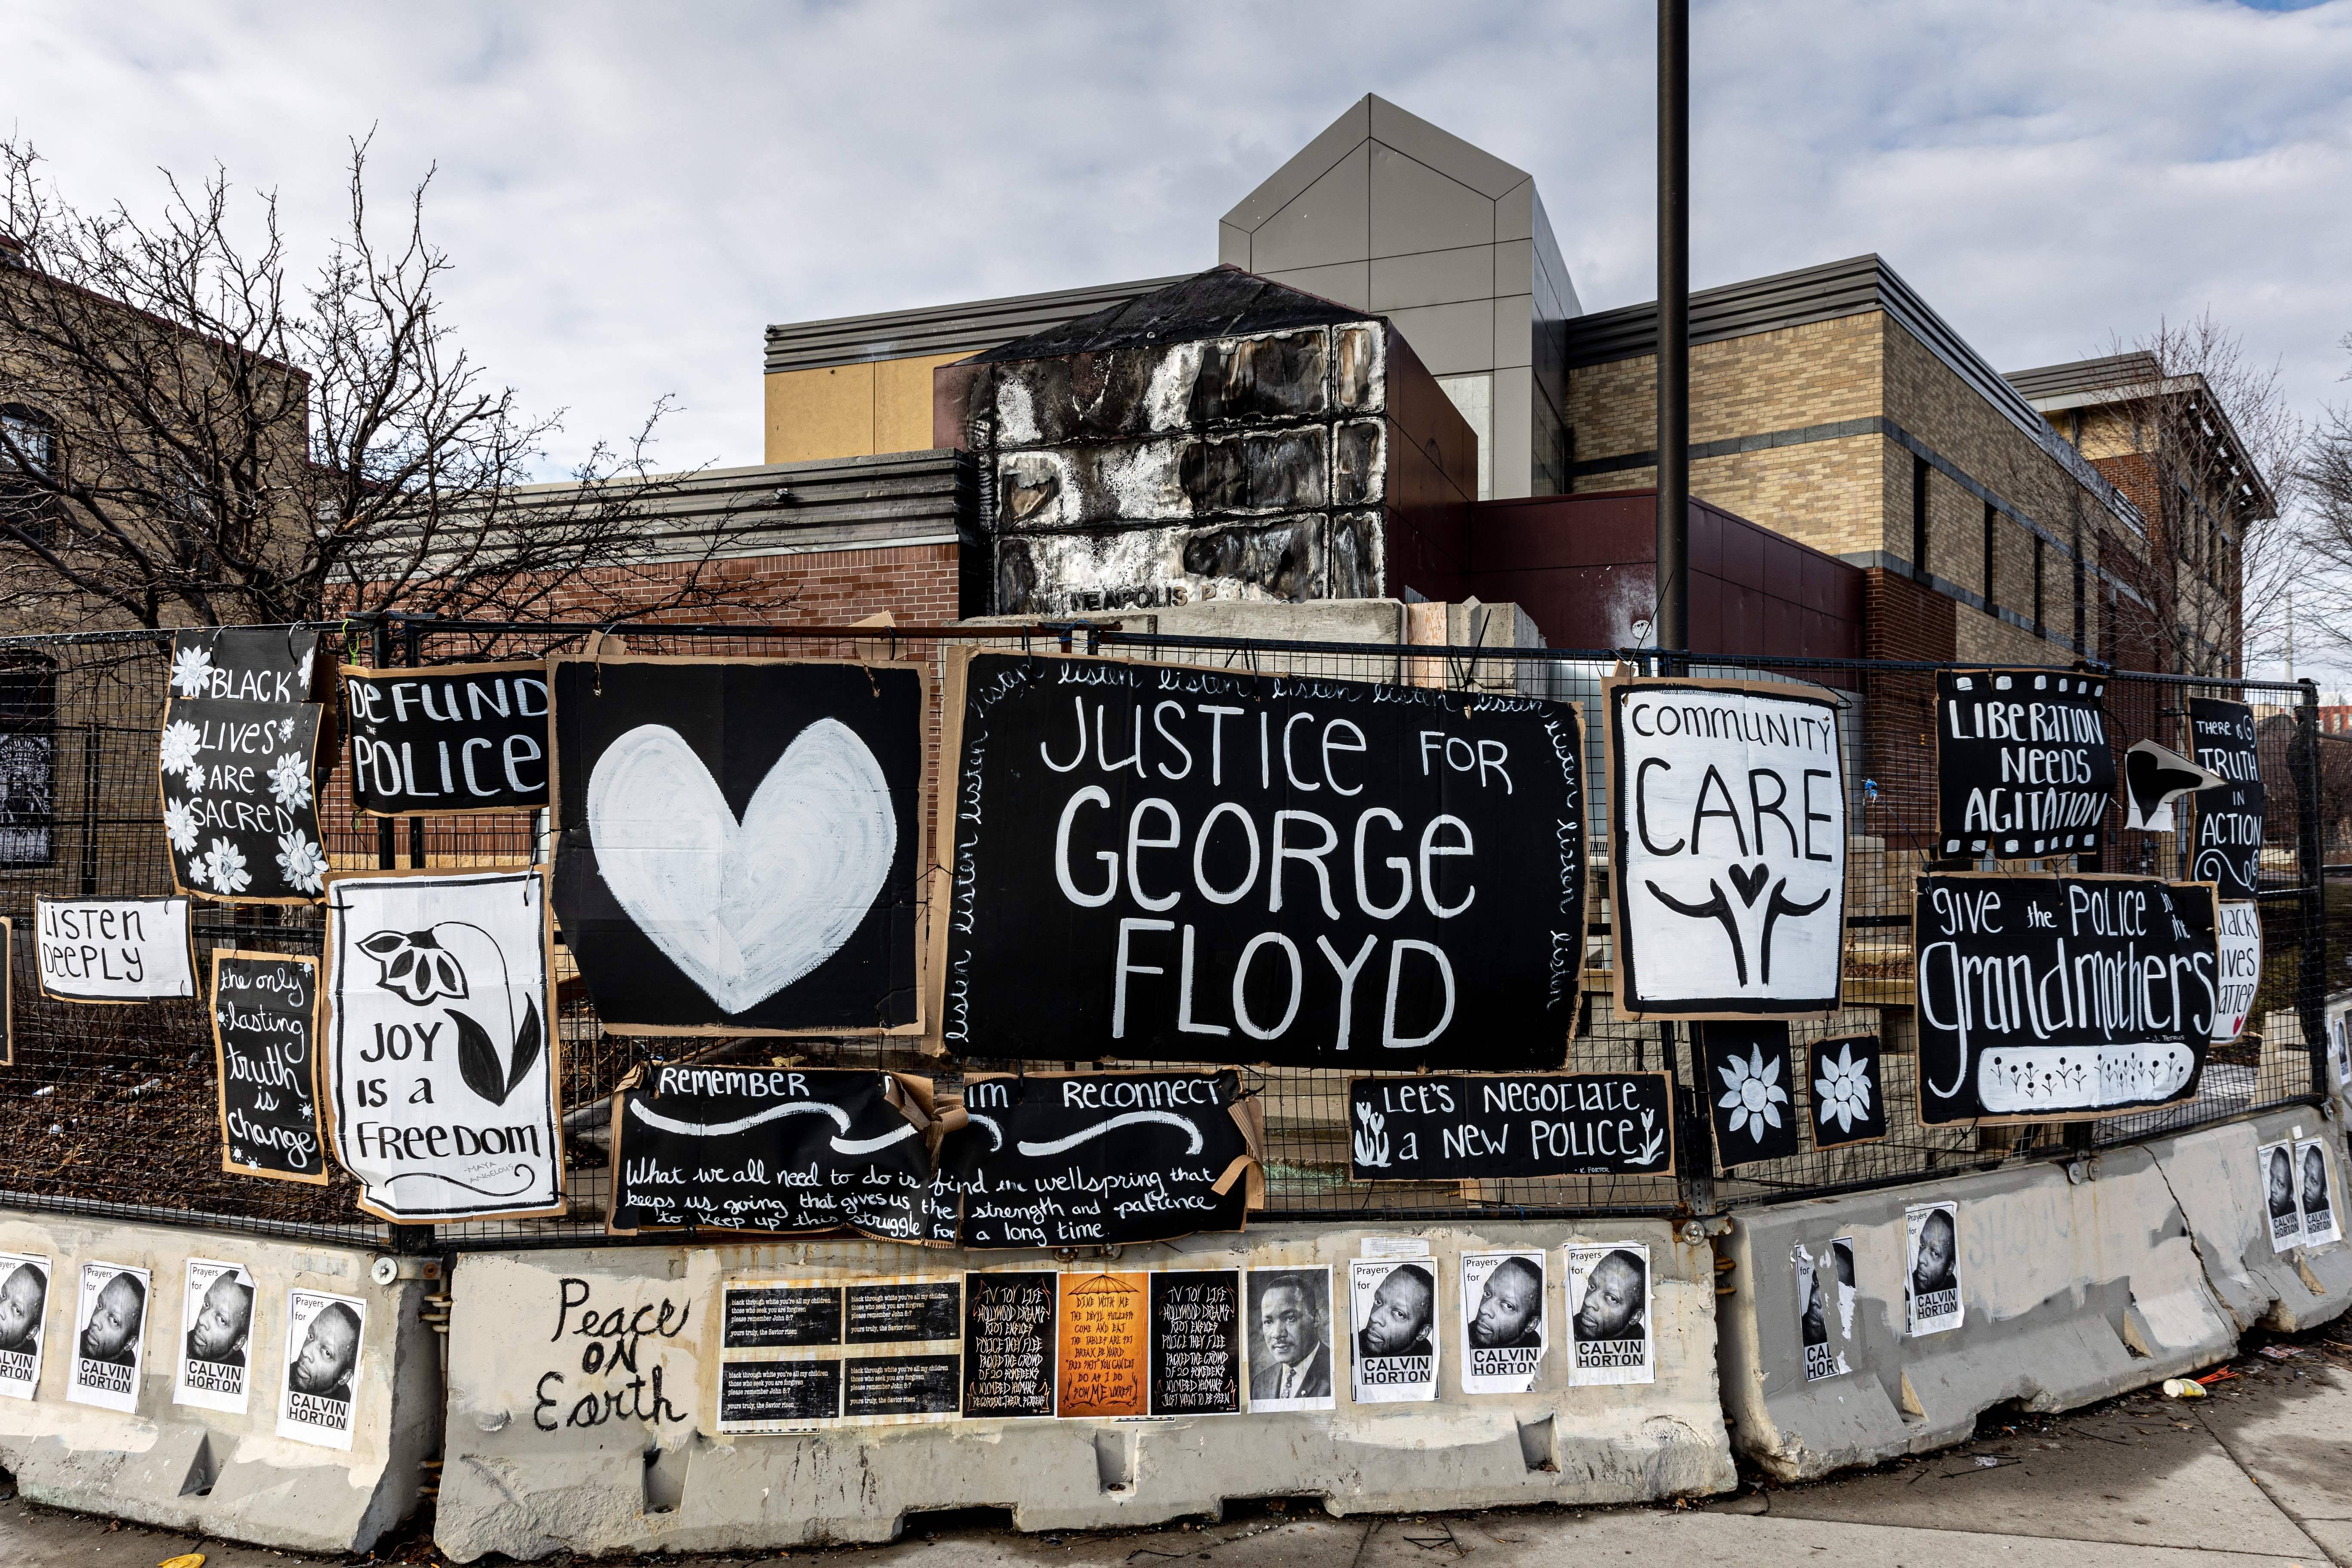 A general view is seen of the burned and destroyed Third Police Precinct on March 11, 2021 in Minneapolis, Minnesota, as the precinct building was  burned May 2020 during the protests after the death of George Floyd. - A Minnesota judge on March 11, 2021 added an additional murder charge against Derek Chauvin, the police officer on trial for the death of George Floyd. Chauvin, 44, is already facing charges of second-degree murder and manslaughter in connection with Floyd's May 25, 2020 death in Minneapolis. (Photo by Kerem Yucel / AFP) (Photo by KEREM YUCEL/AFP via Getty Images)